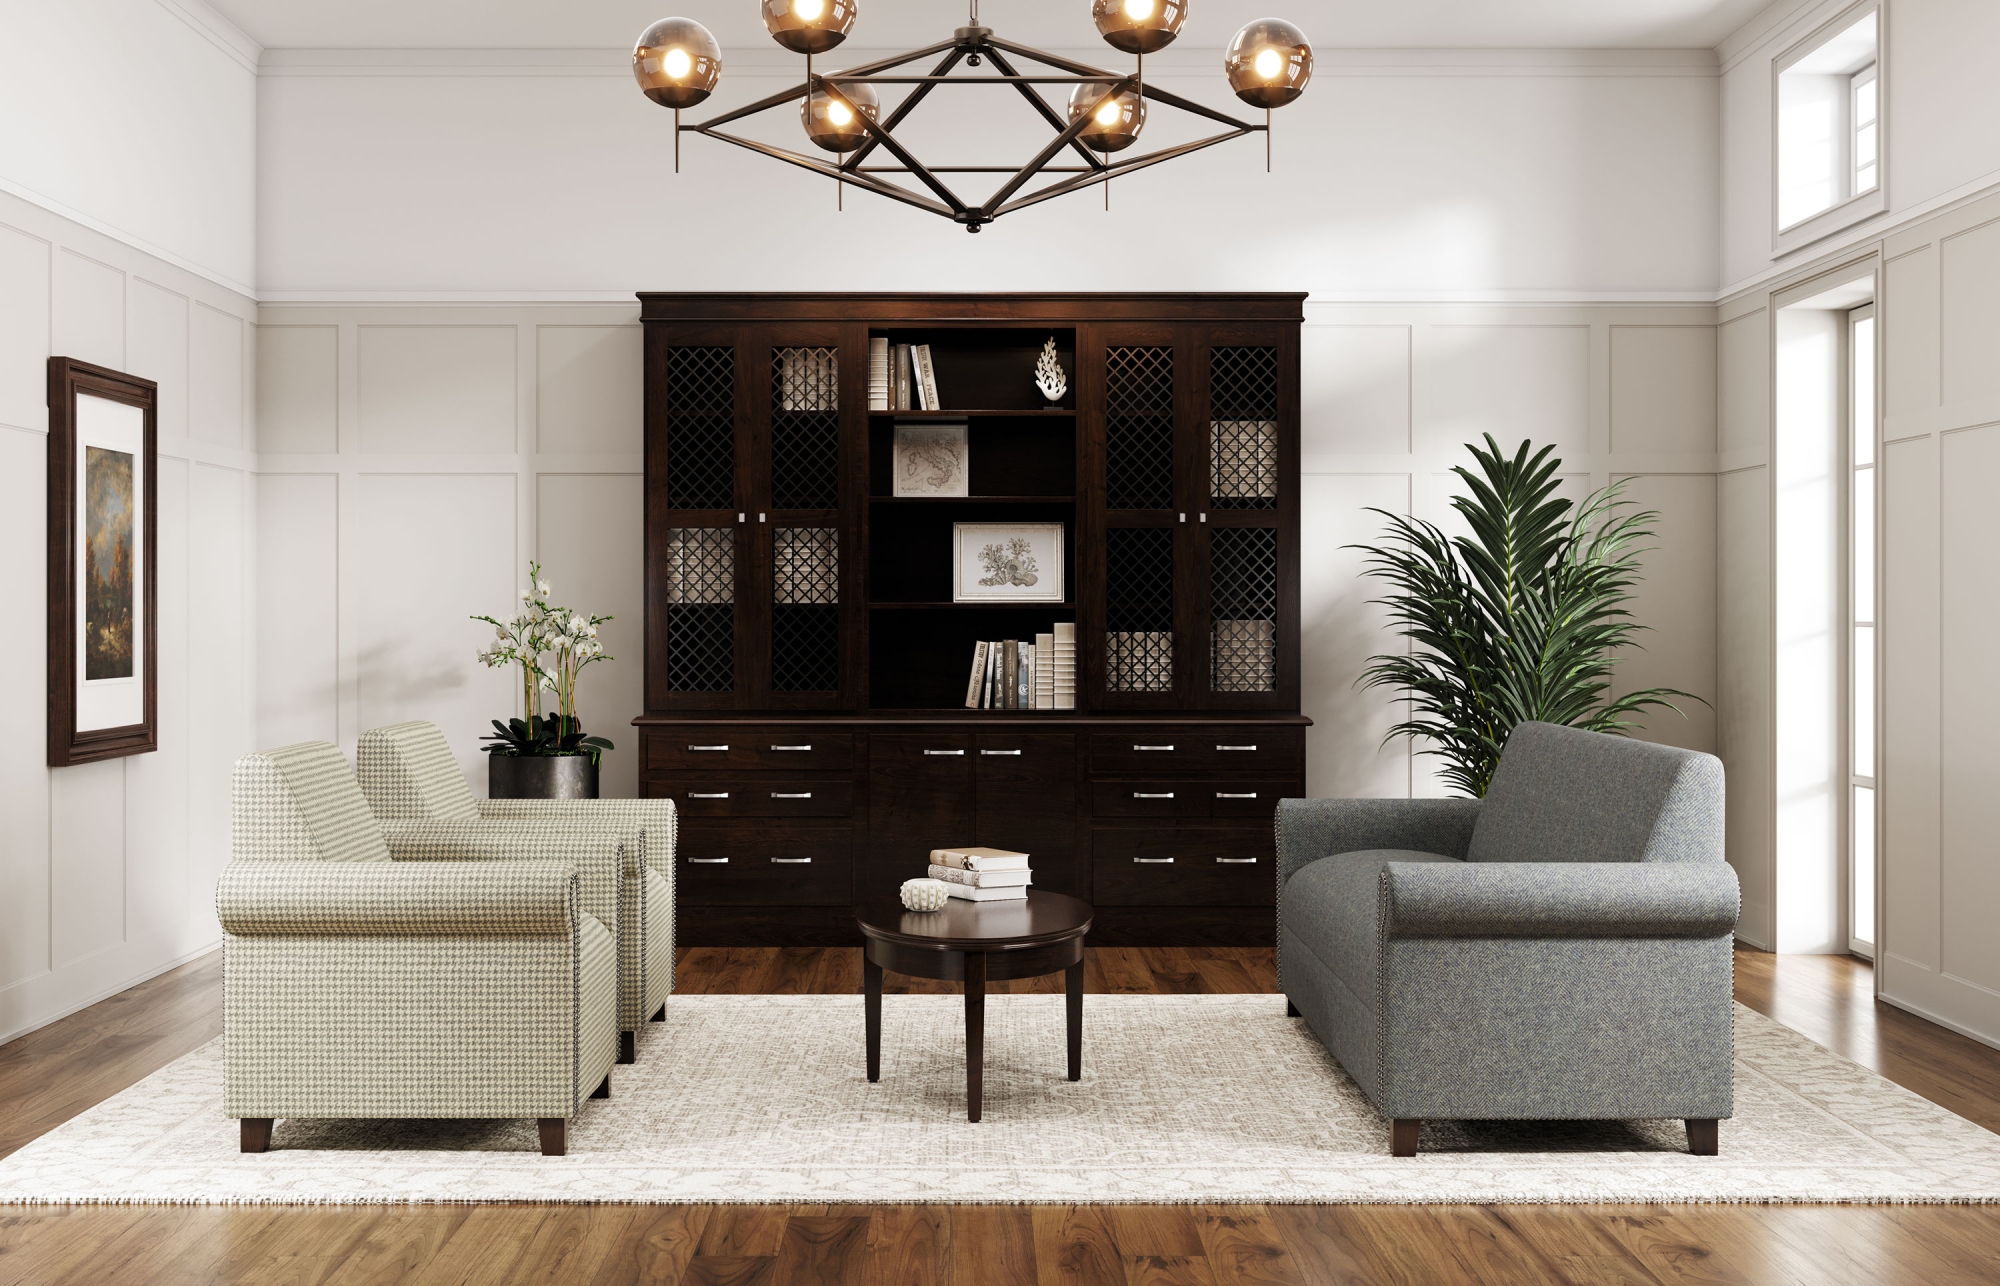 Indiana Furniture, Whether you’re looking to outfit the front entrance, an executive office, private nook, or anything in